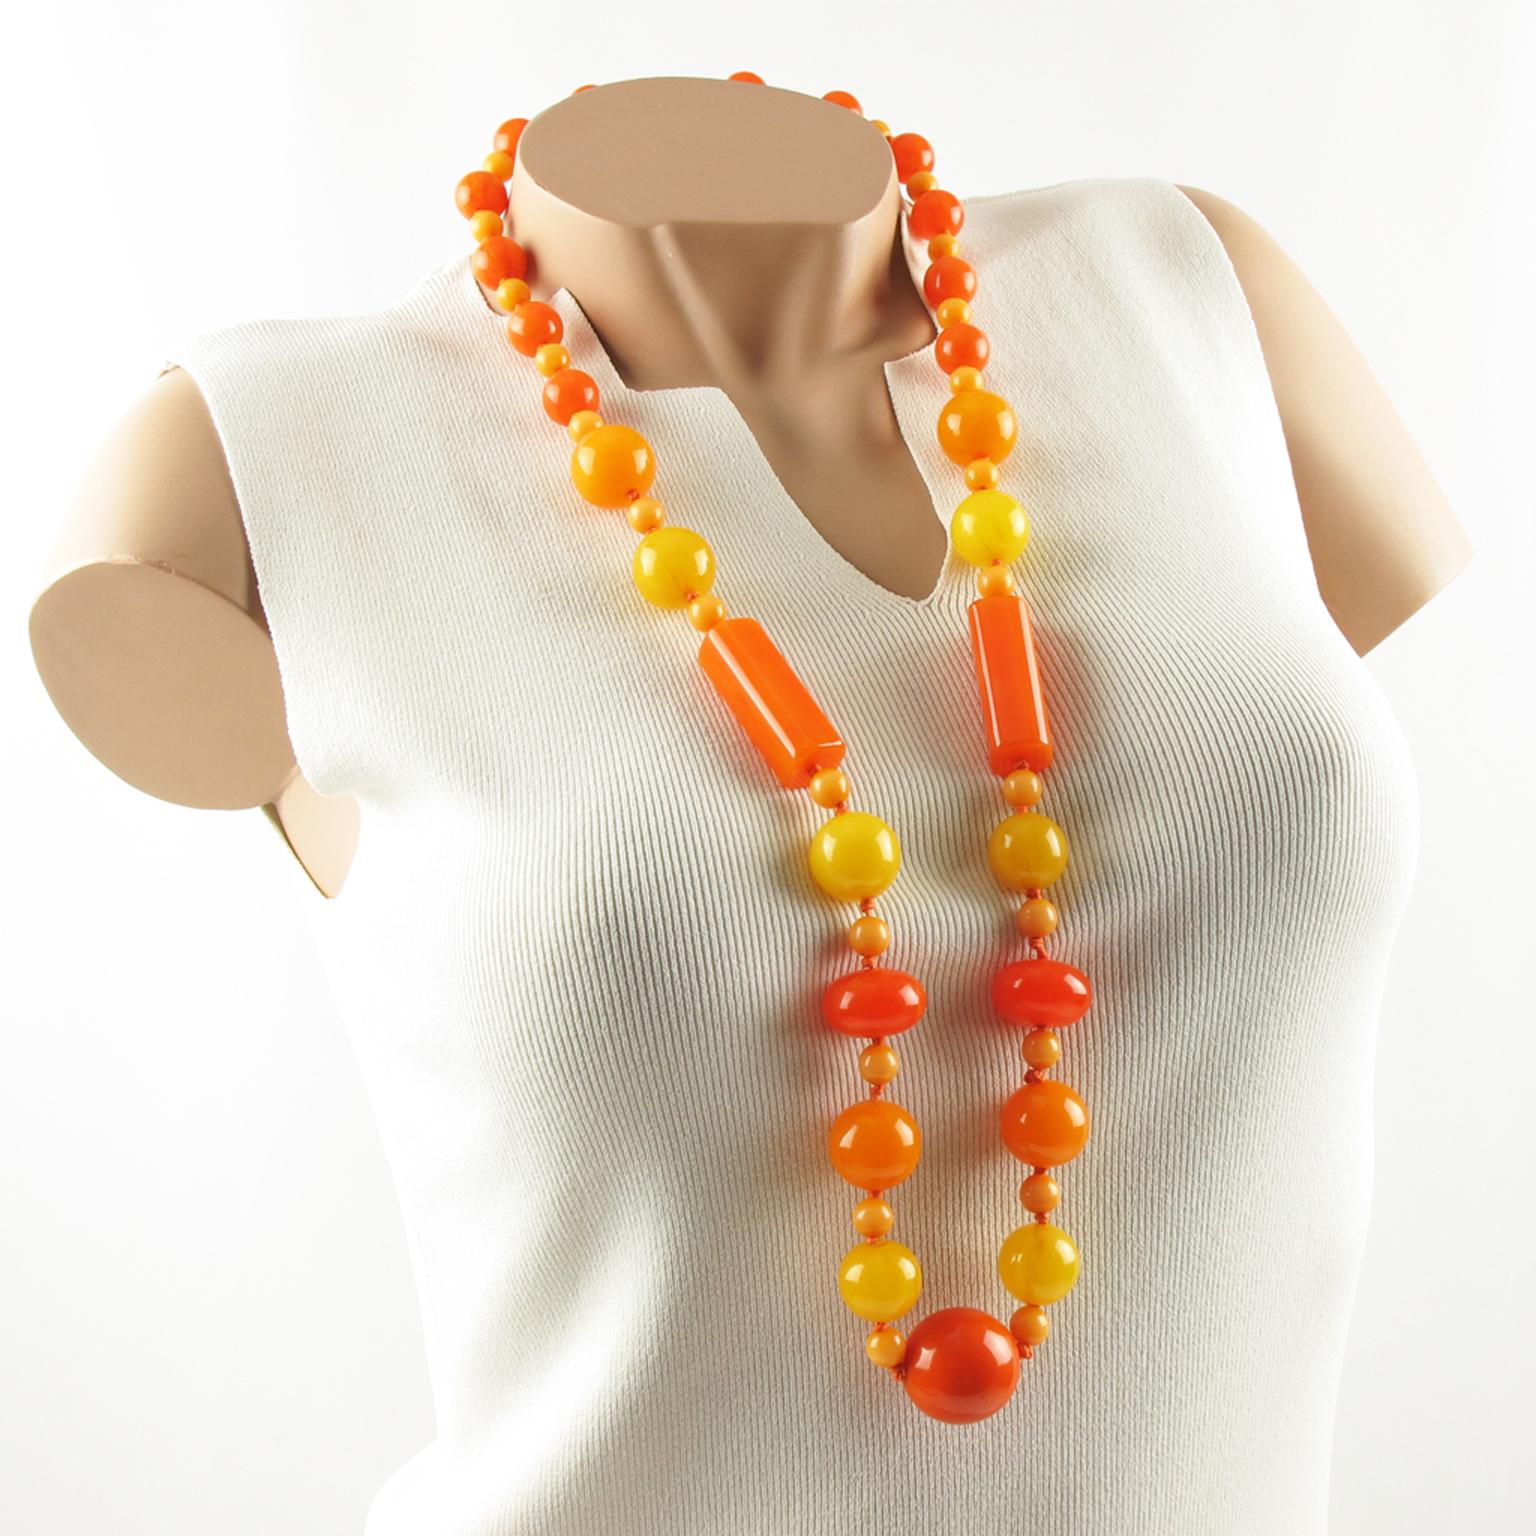 Lovely extra long Bakelite necklace. Assorted beads in various carved shape: round, tomato, long stick and large central bead. Lovely mix and match of colorful sunny colors in assorted tones of neon orange marble, orange tangerine marble, milky